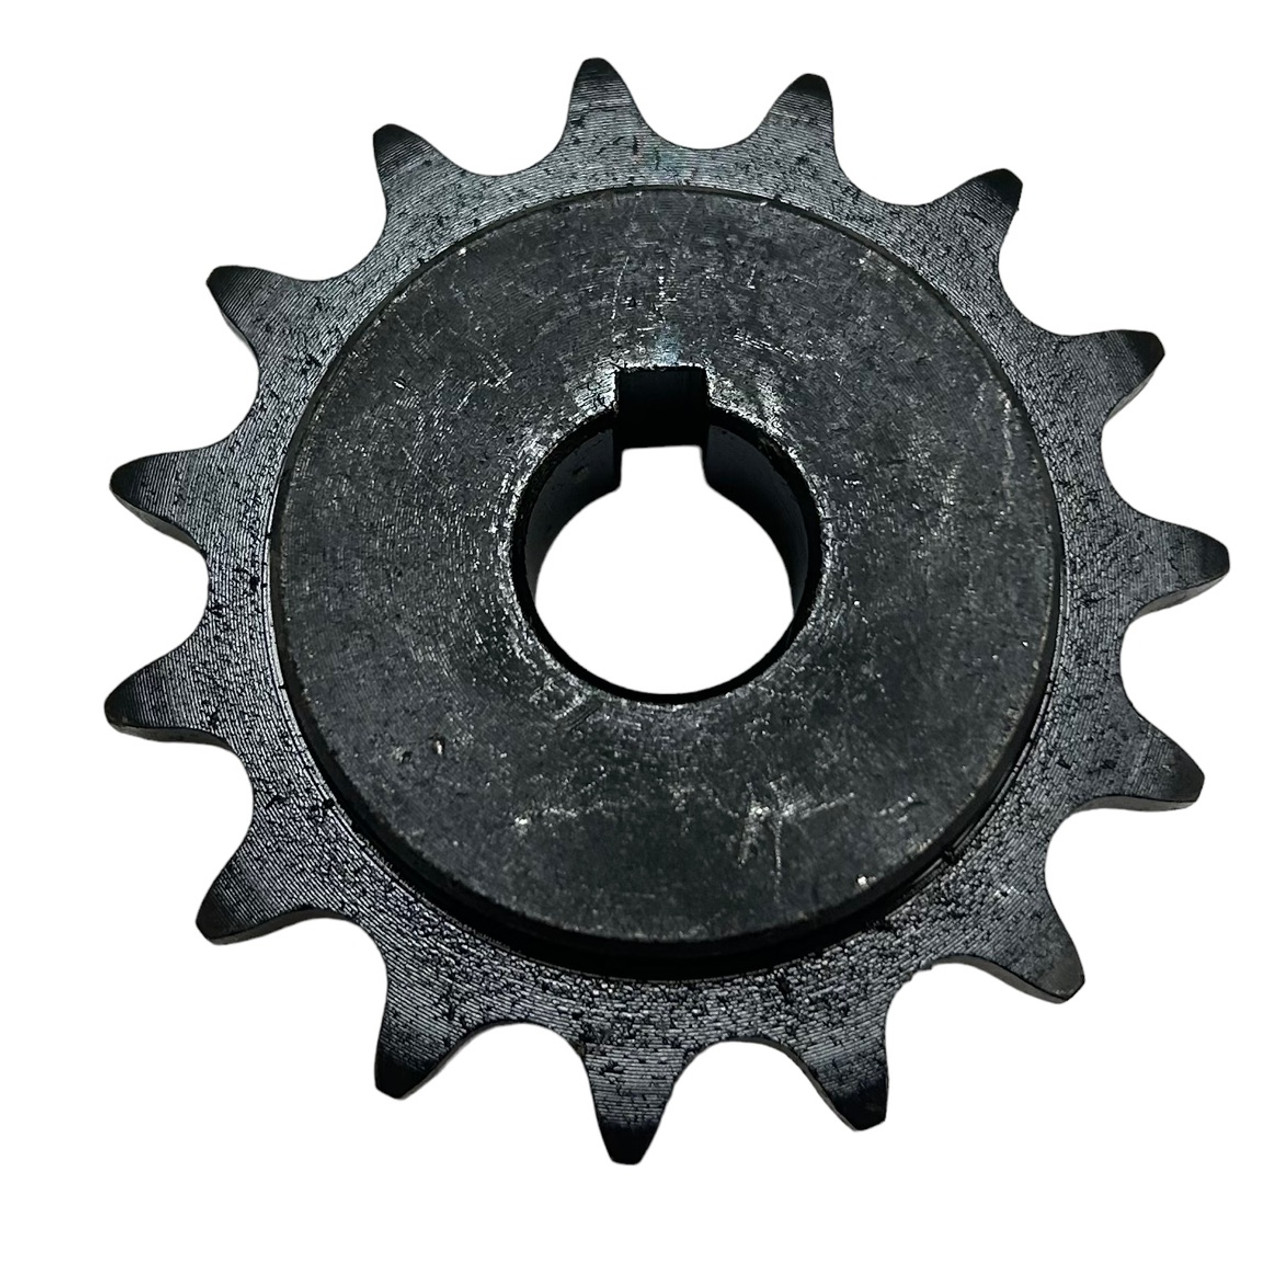 15 Tooth 5/8 Bore C-Sprocket. For 40,41,420 Chain. 